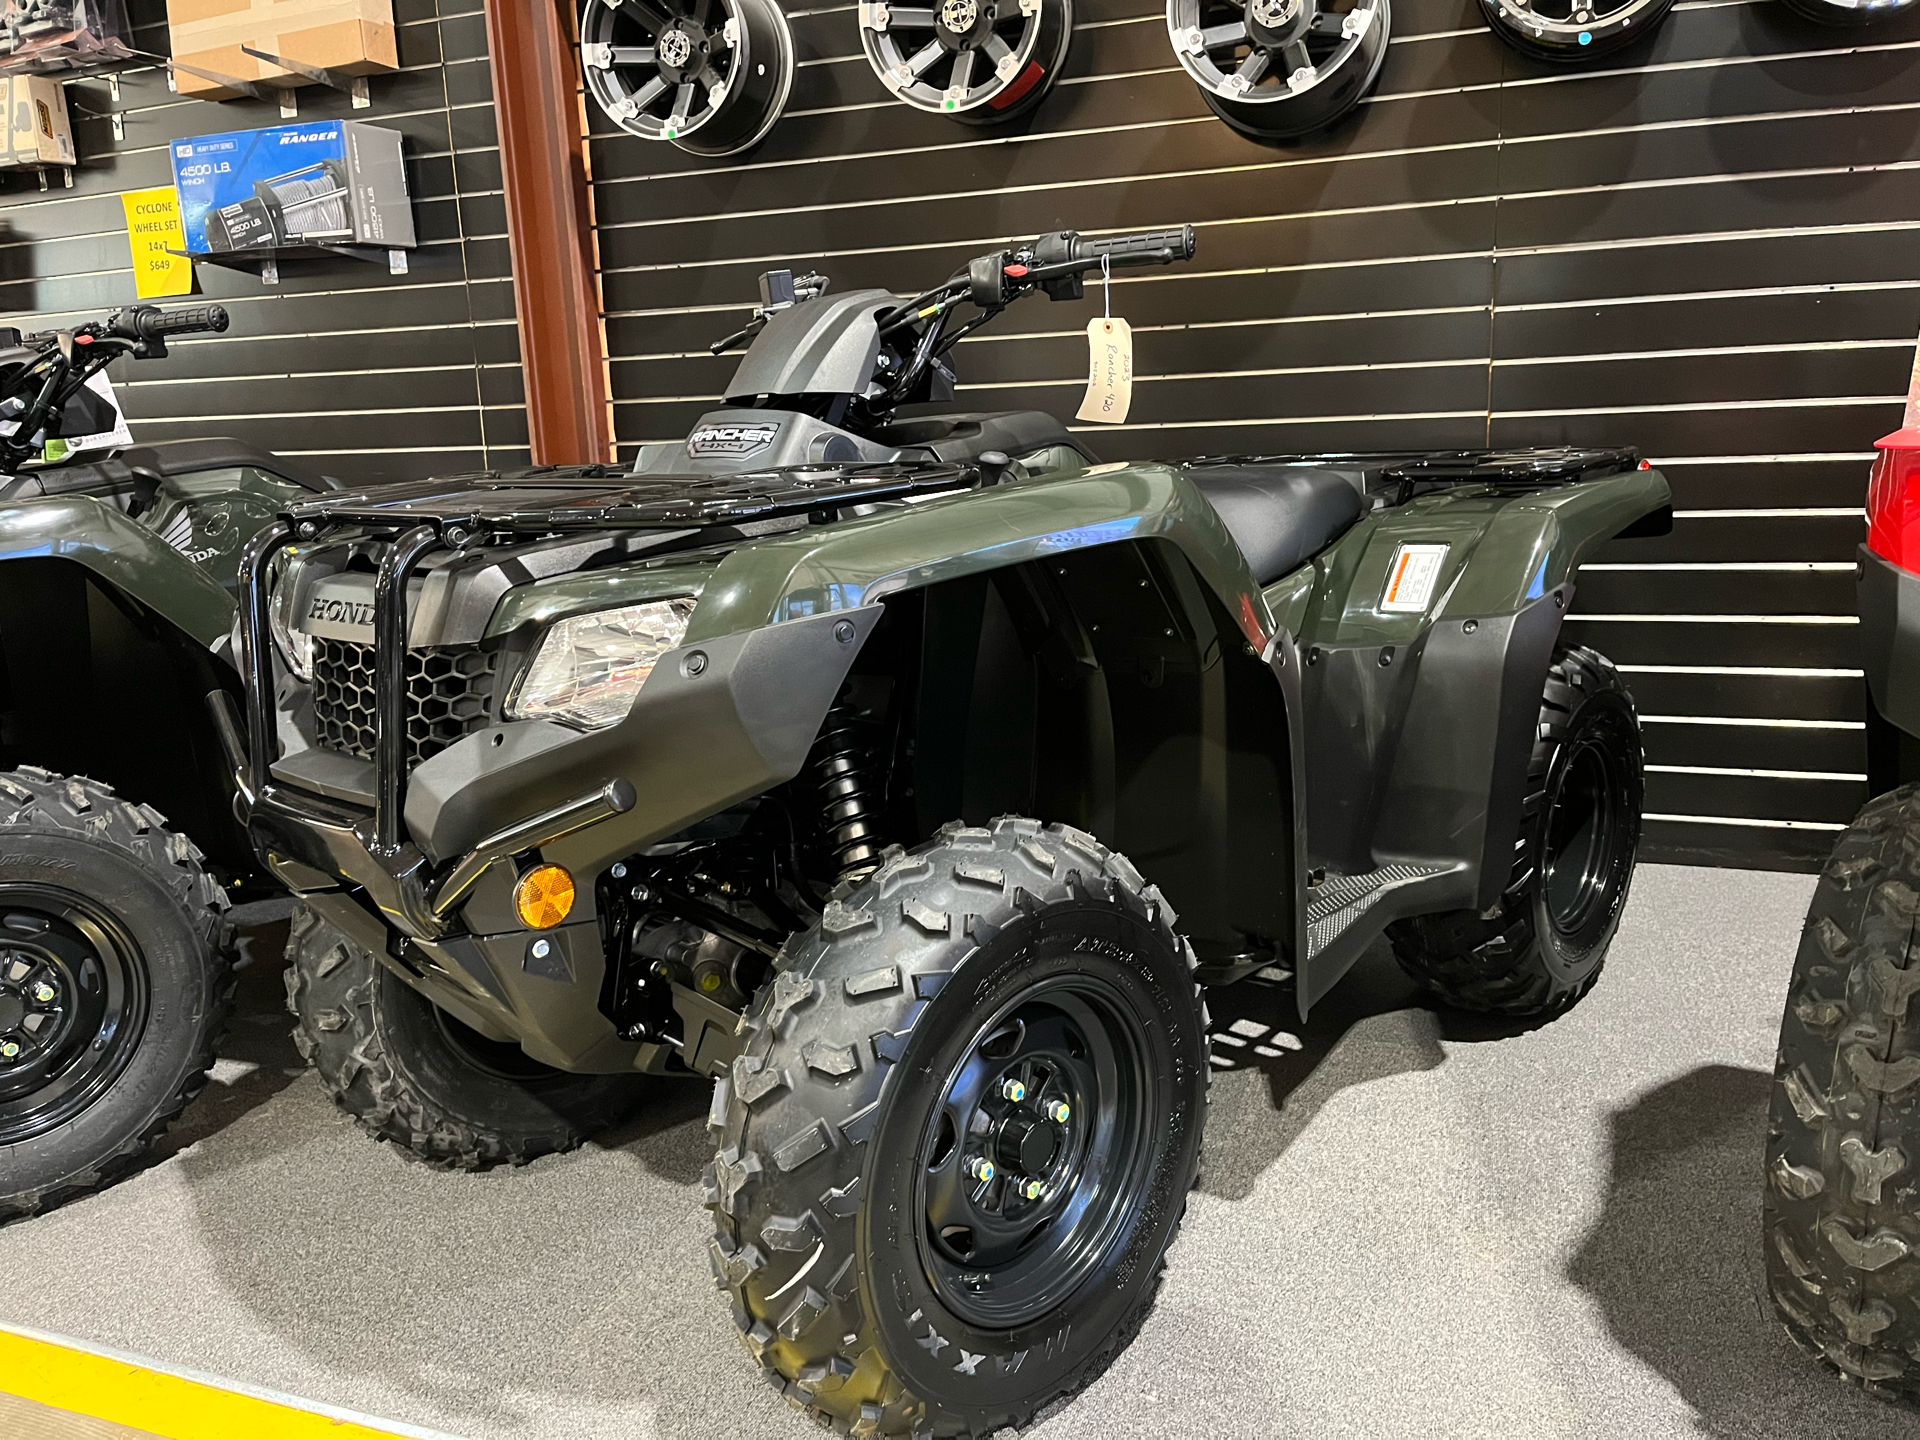 2023 Honda FourTrax Rancher 4x4 in Crossville, Tennessee - Photo 1